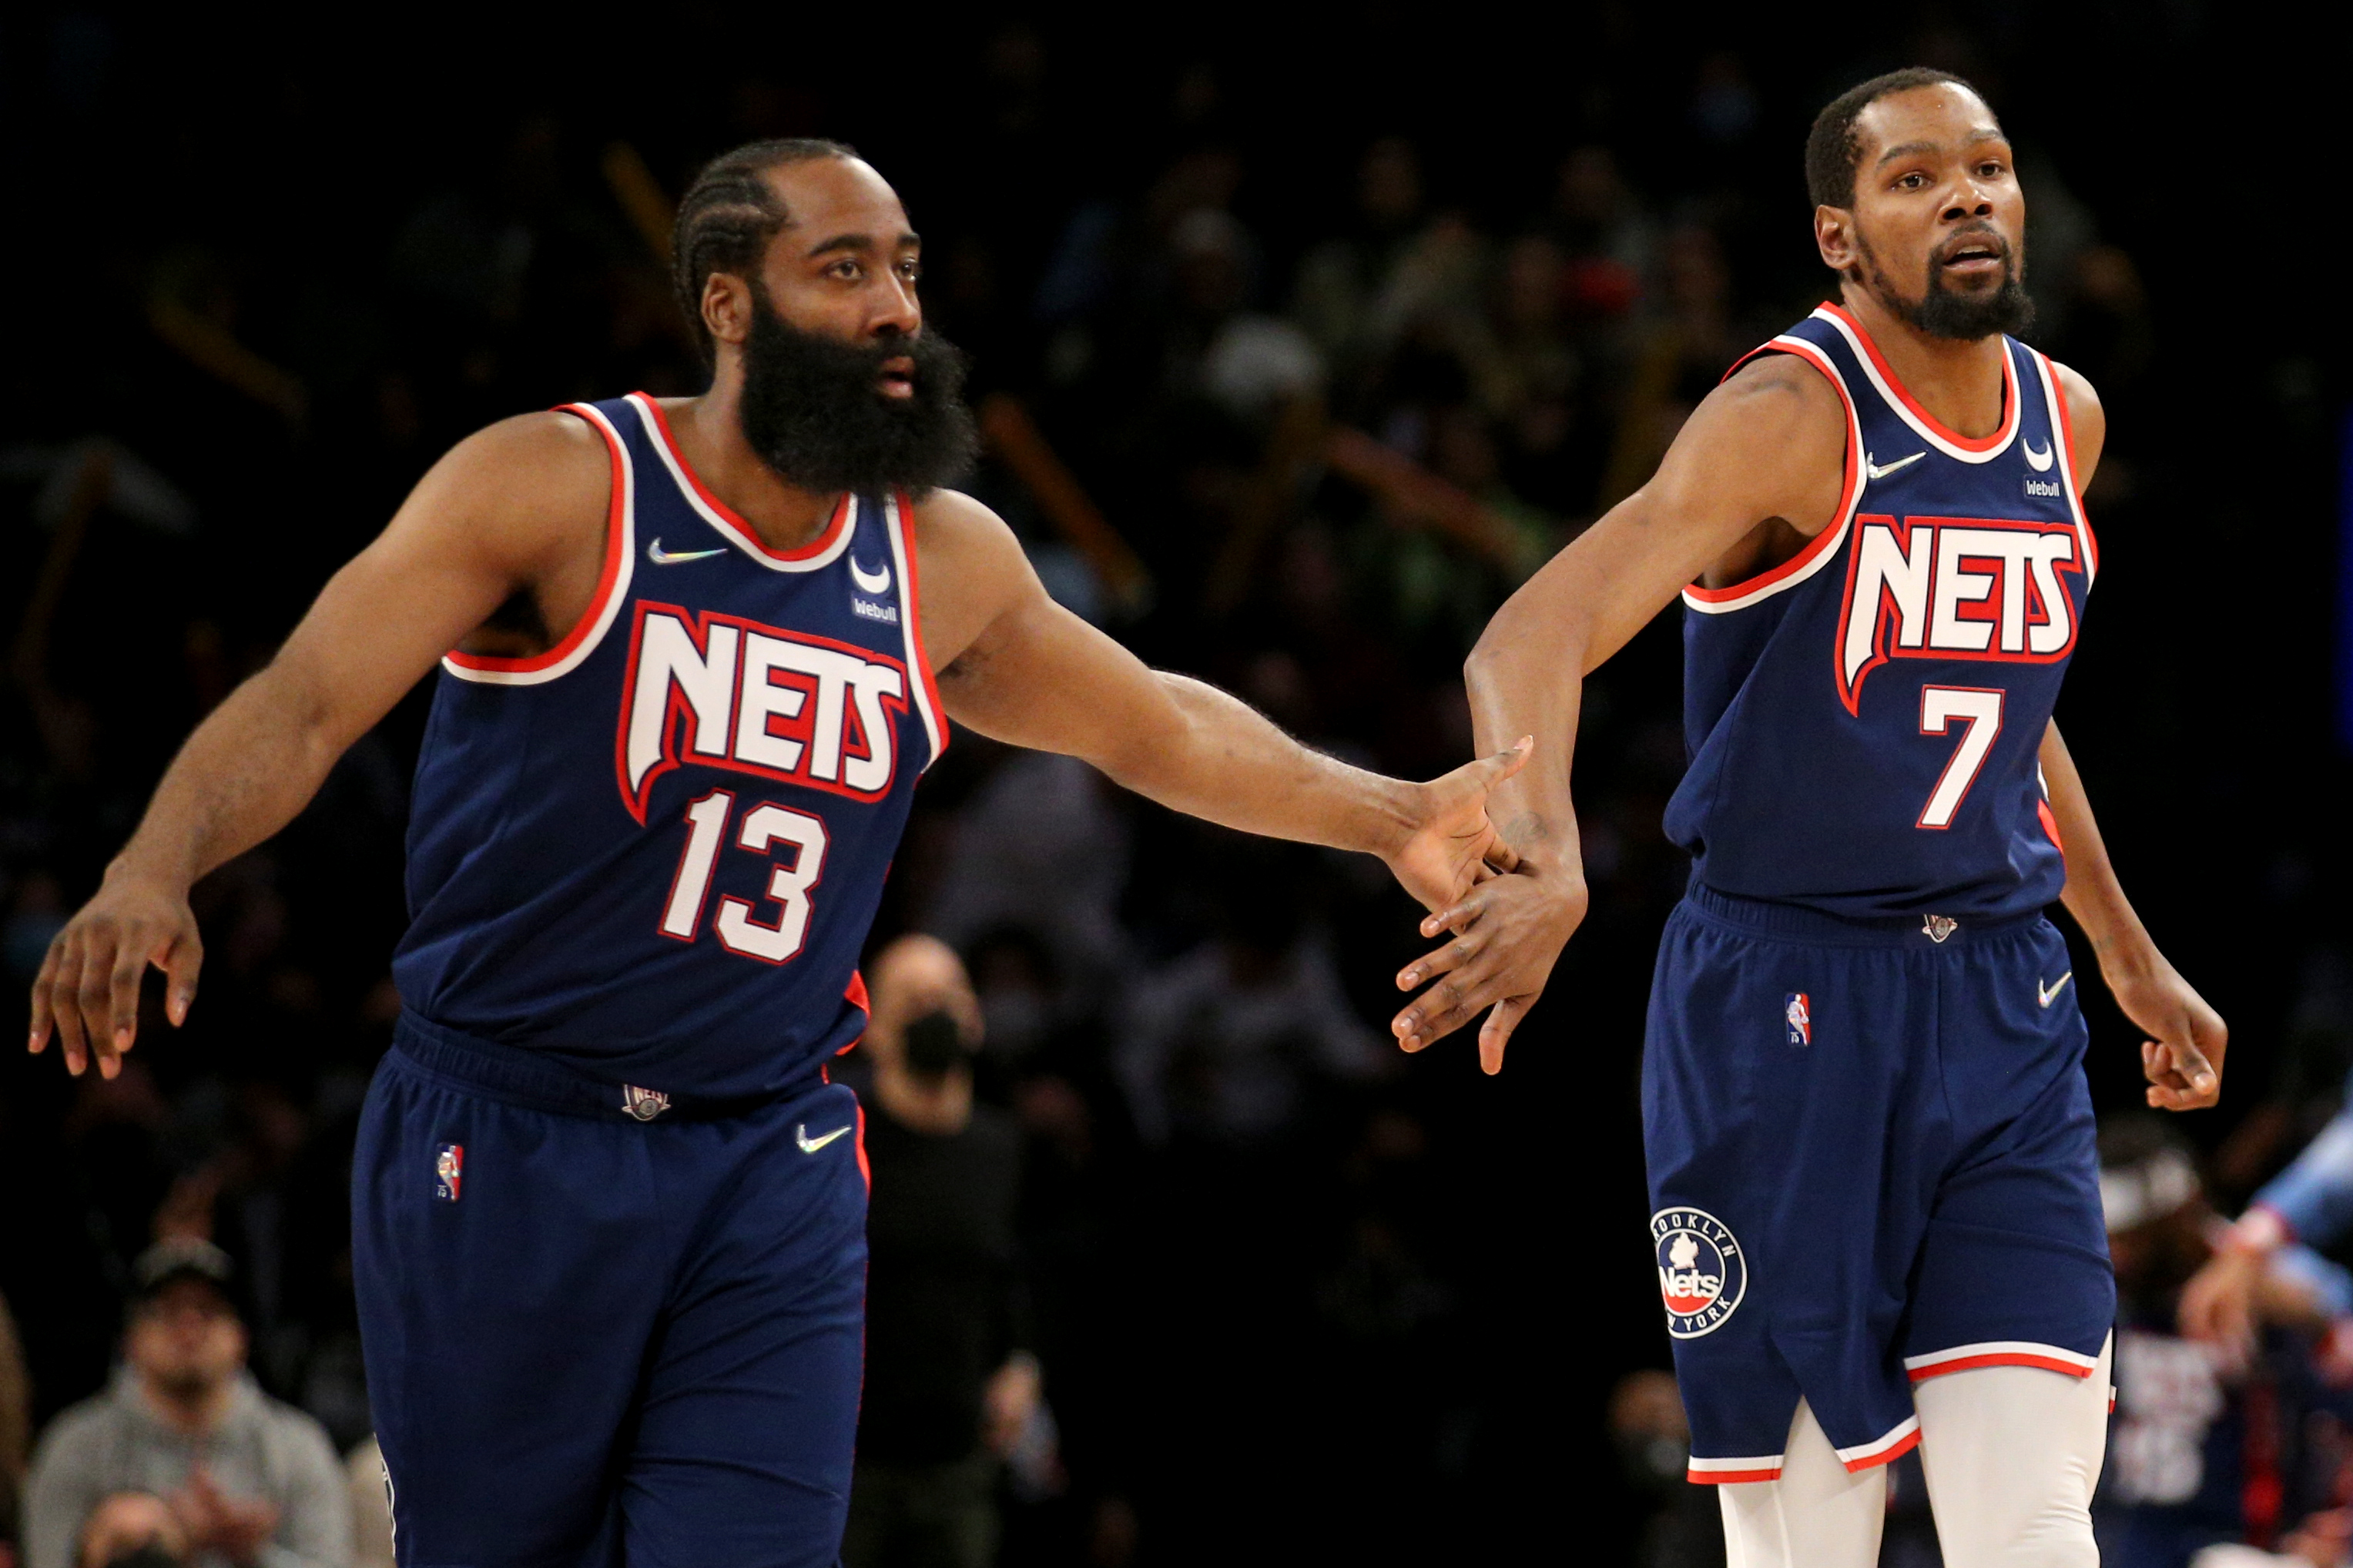 Dec 3, 2021; Brooklyn, New York, USA; Brooklyn Nets forward Kevin Durant (7) celebrates with guard James Harden (13) after a basket against the Minnesota Timberwolves during the fourth quarter at Barclays Center./Brad Penner-USA TODAY Sports